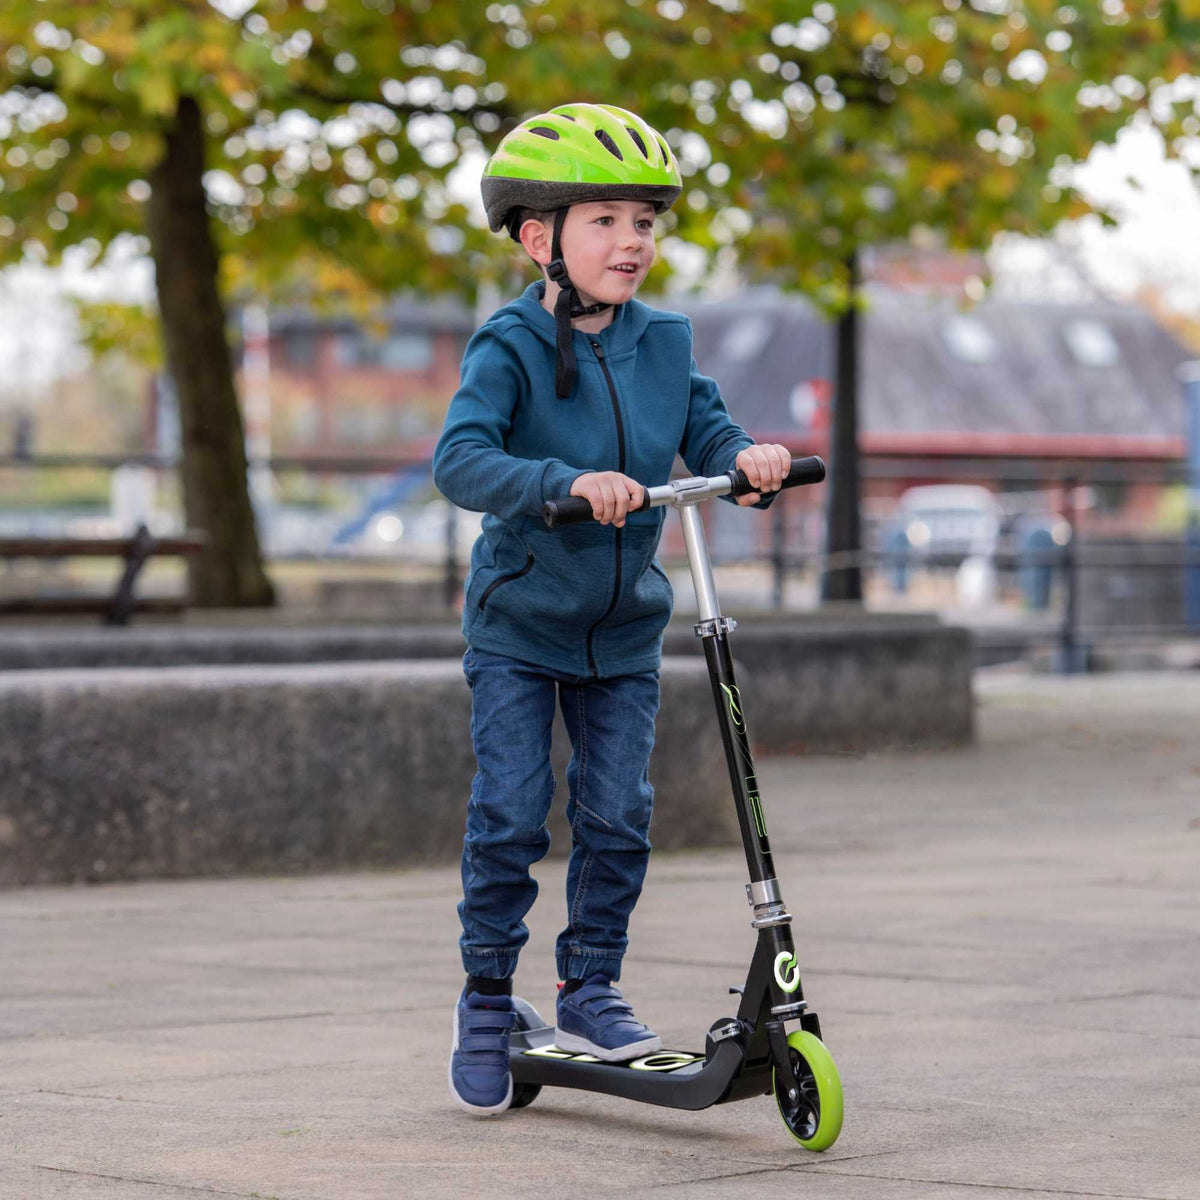 Electric Scooter, E-Scooter, Lithium Scooter, Kids Scooter, 2 Wheeled Scooter, Battery Powered Scooter, Childrens Electric Scooter